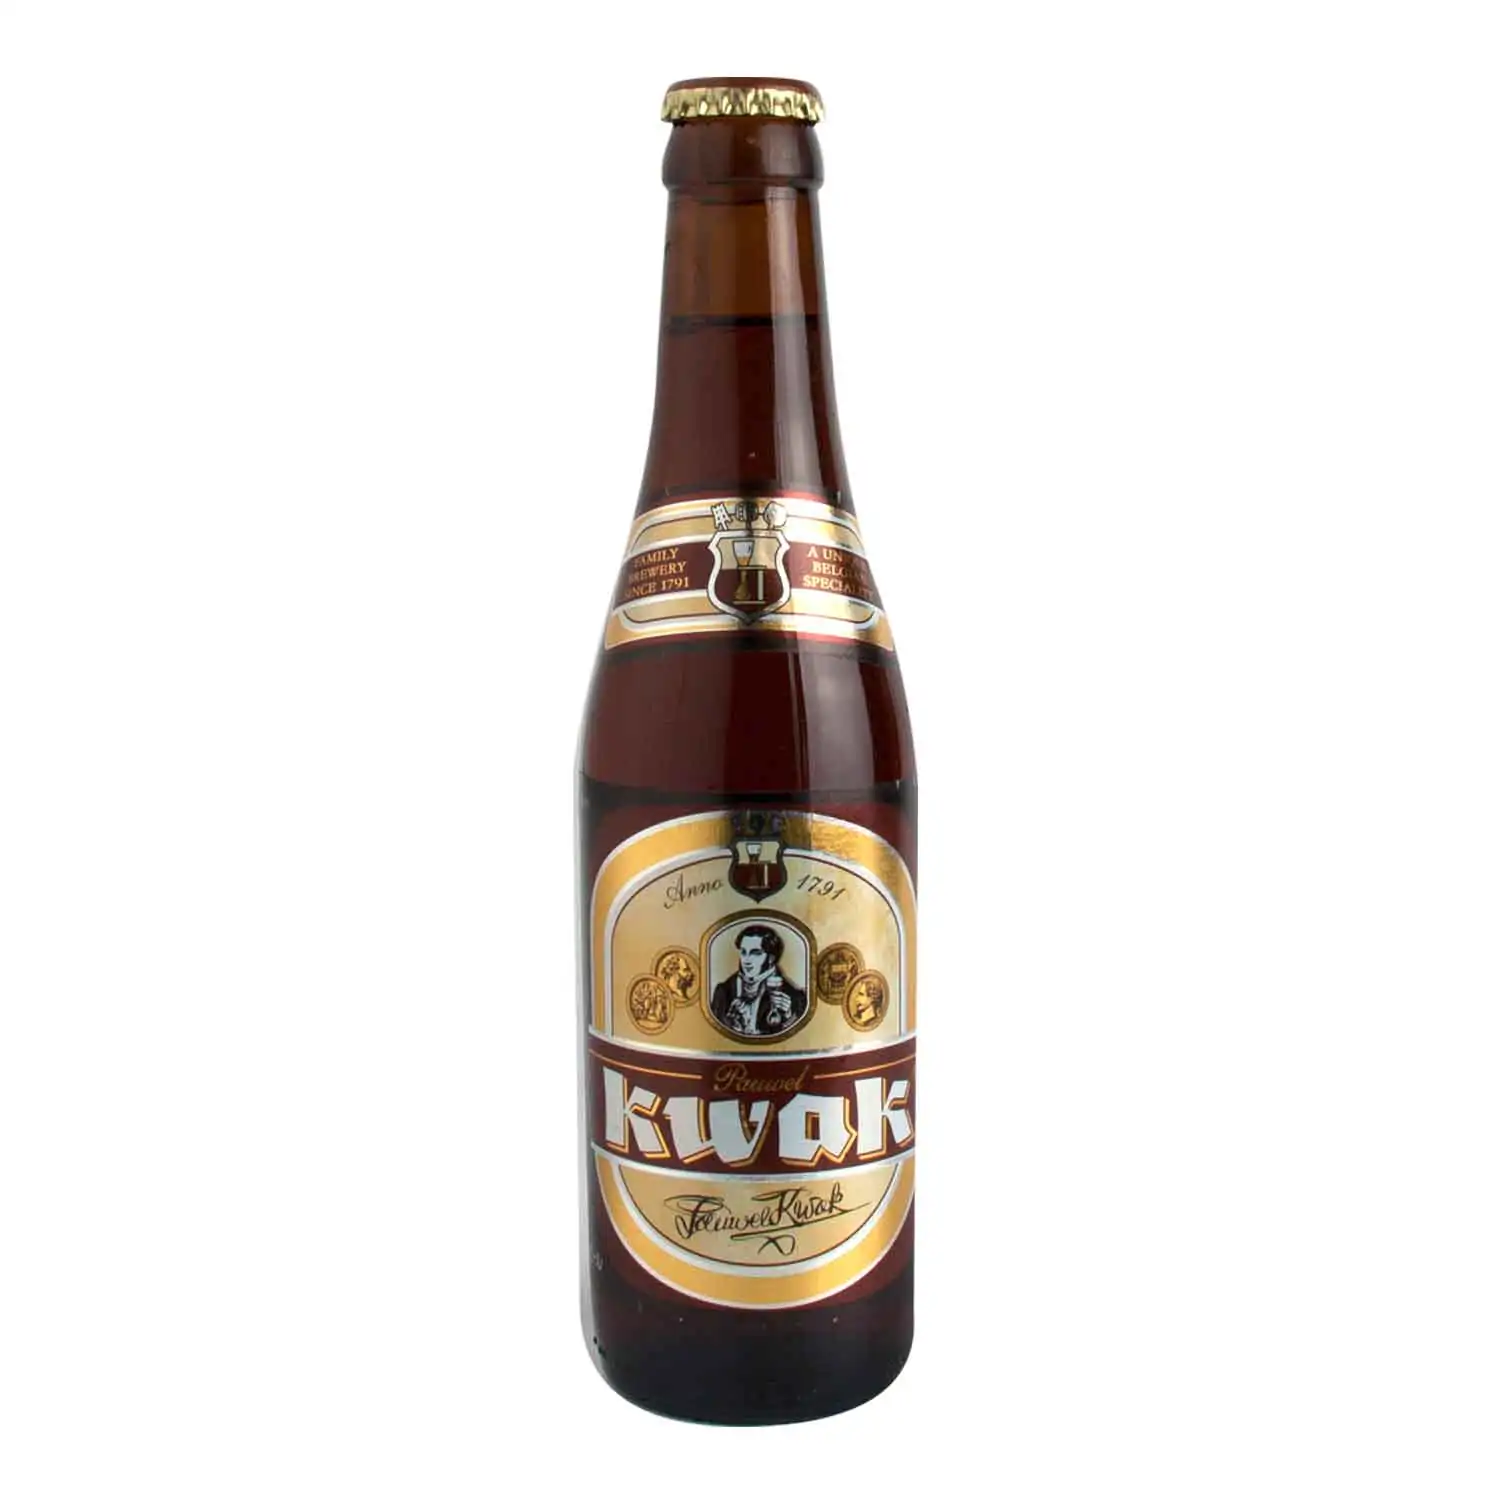 Kwak amber 33cl Alc 8,4% - Buy at Real Tobacco